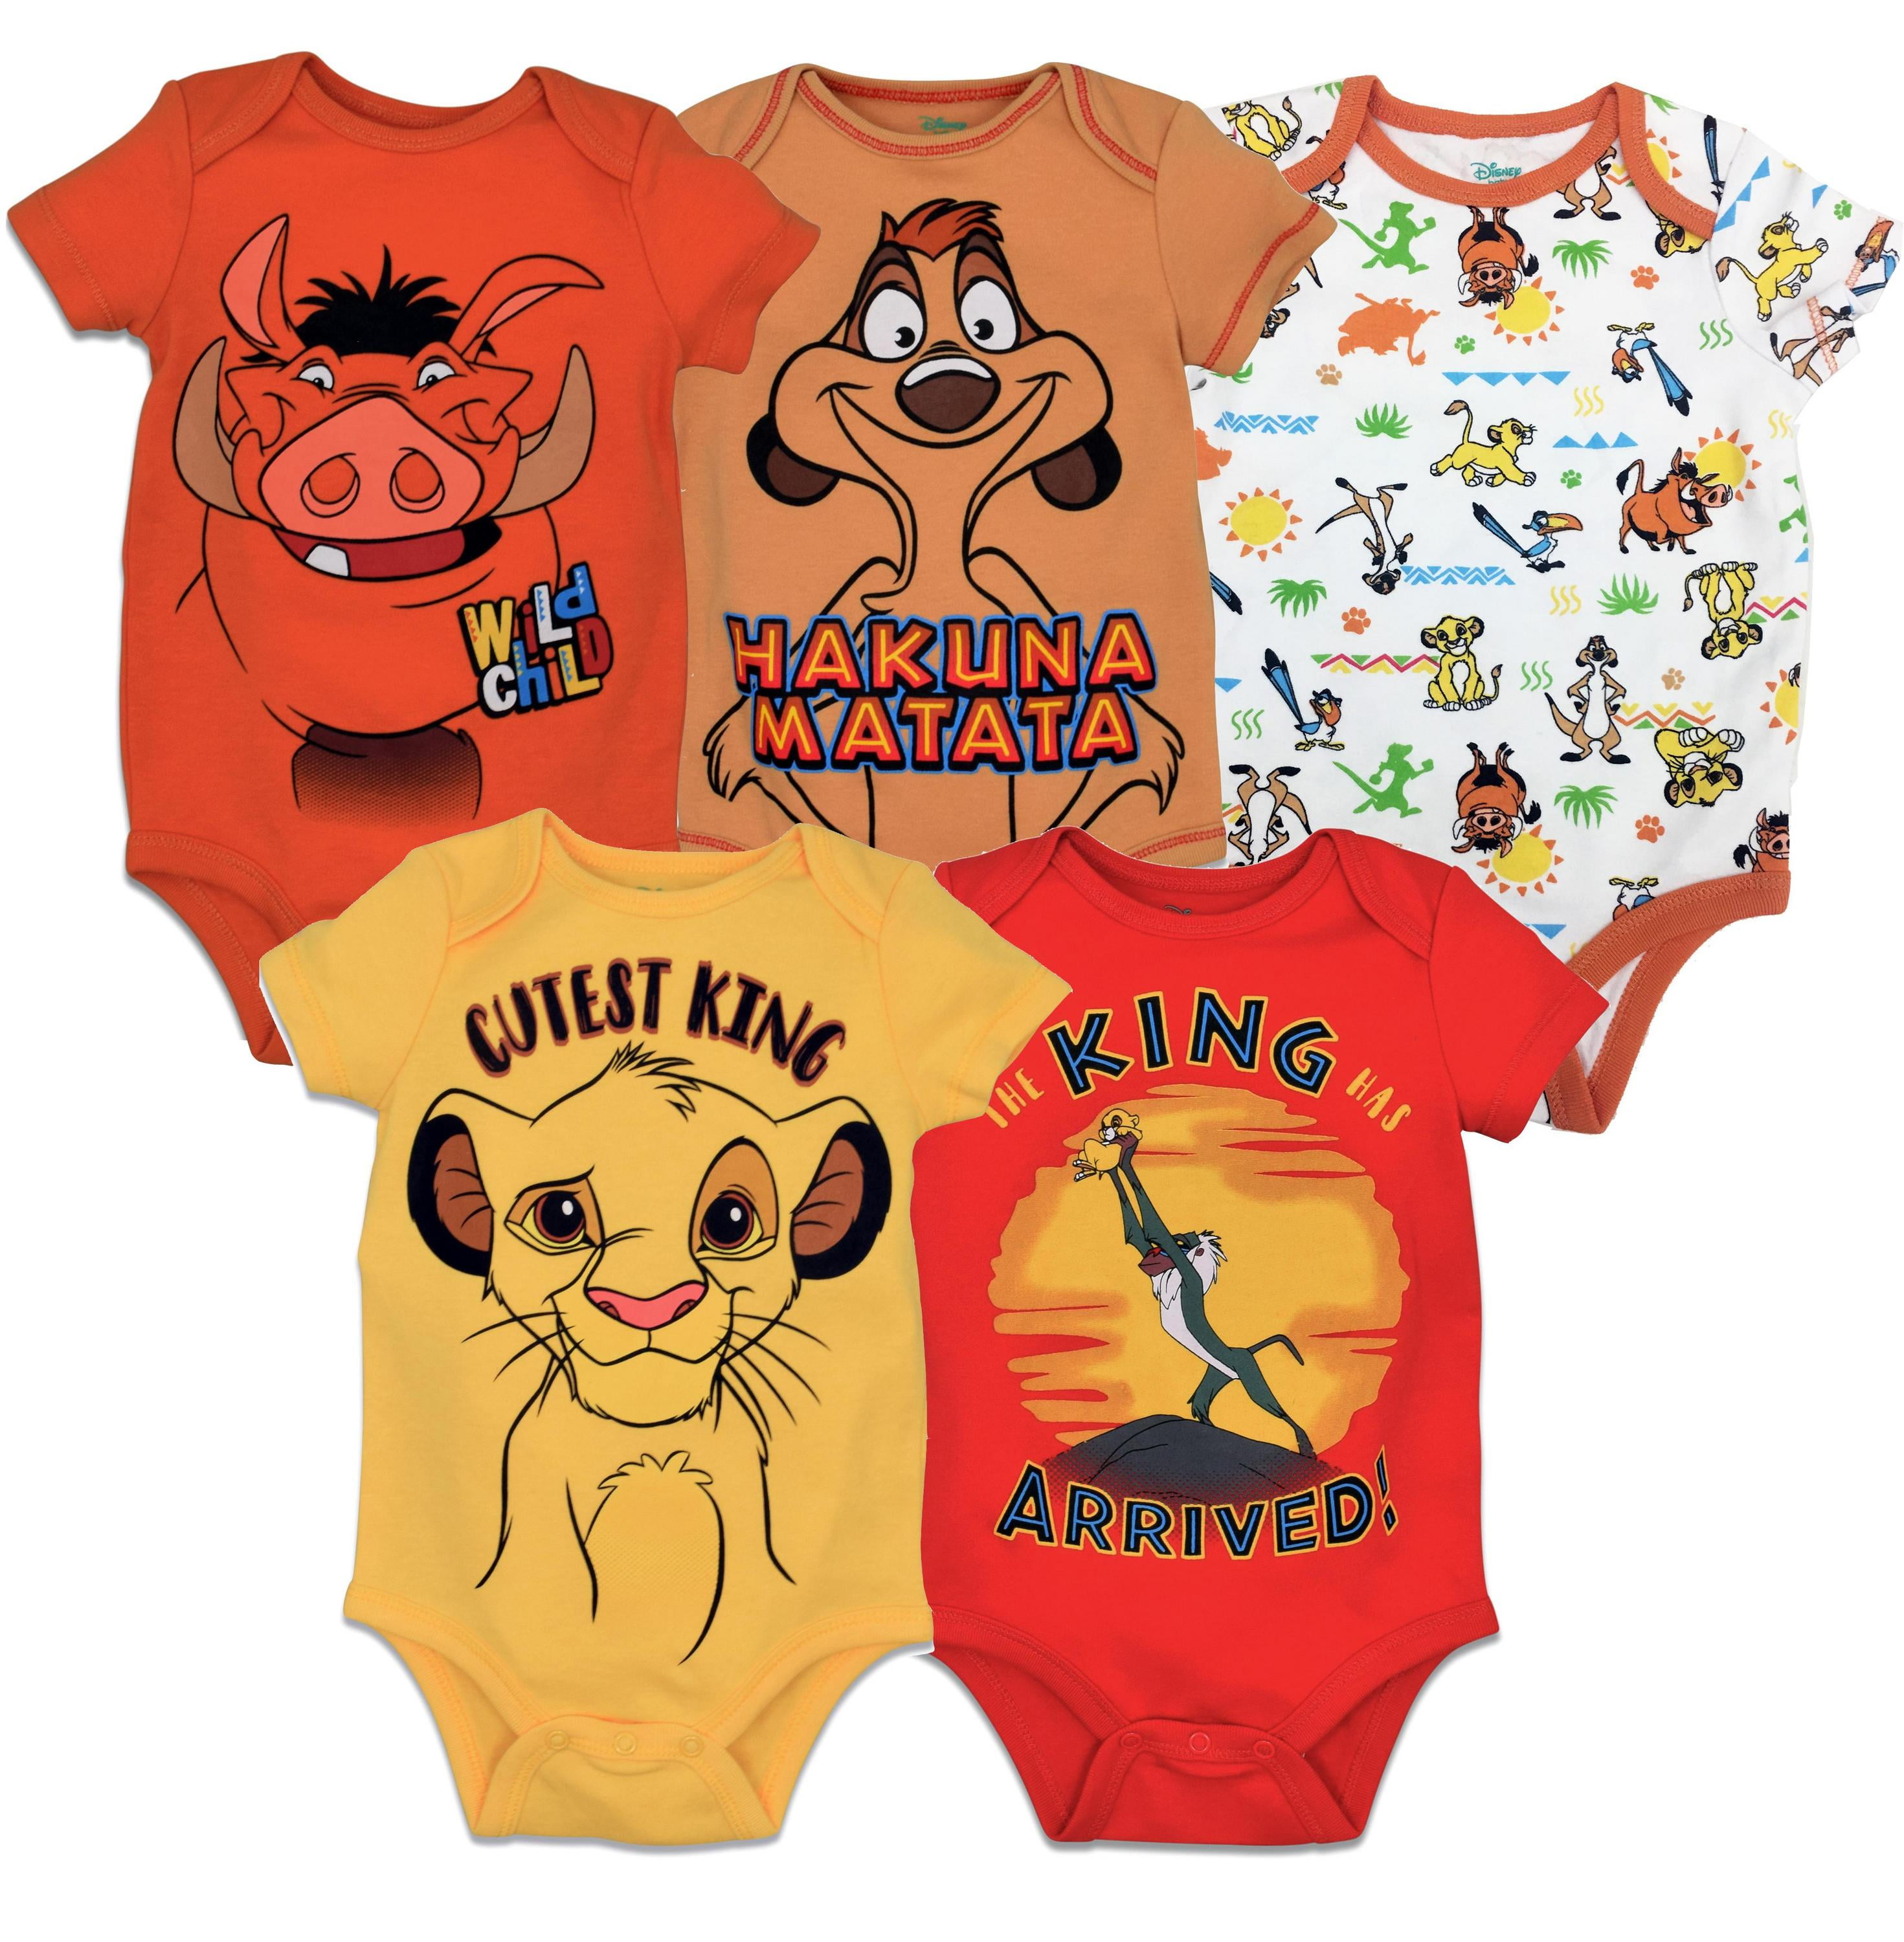 Boys Disney The Lion King all in one pyjamas 5 to 6 years